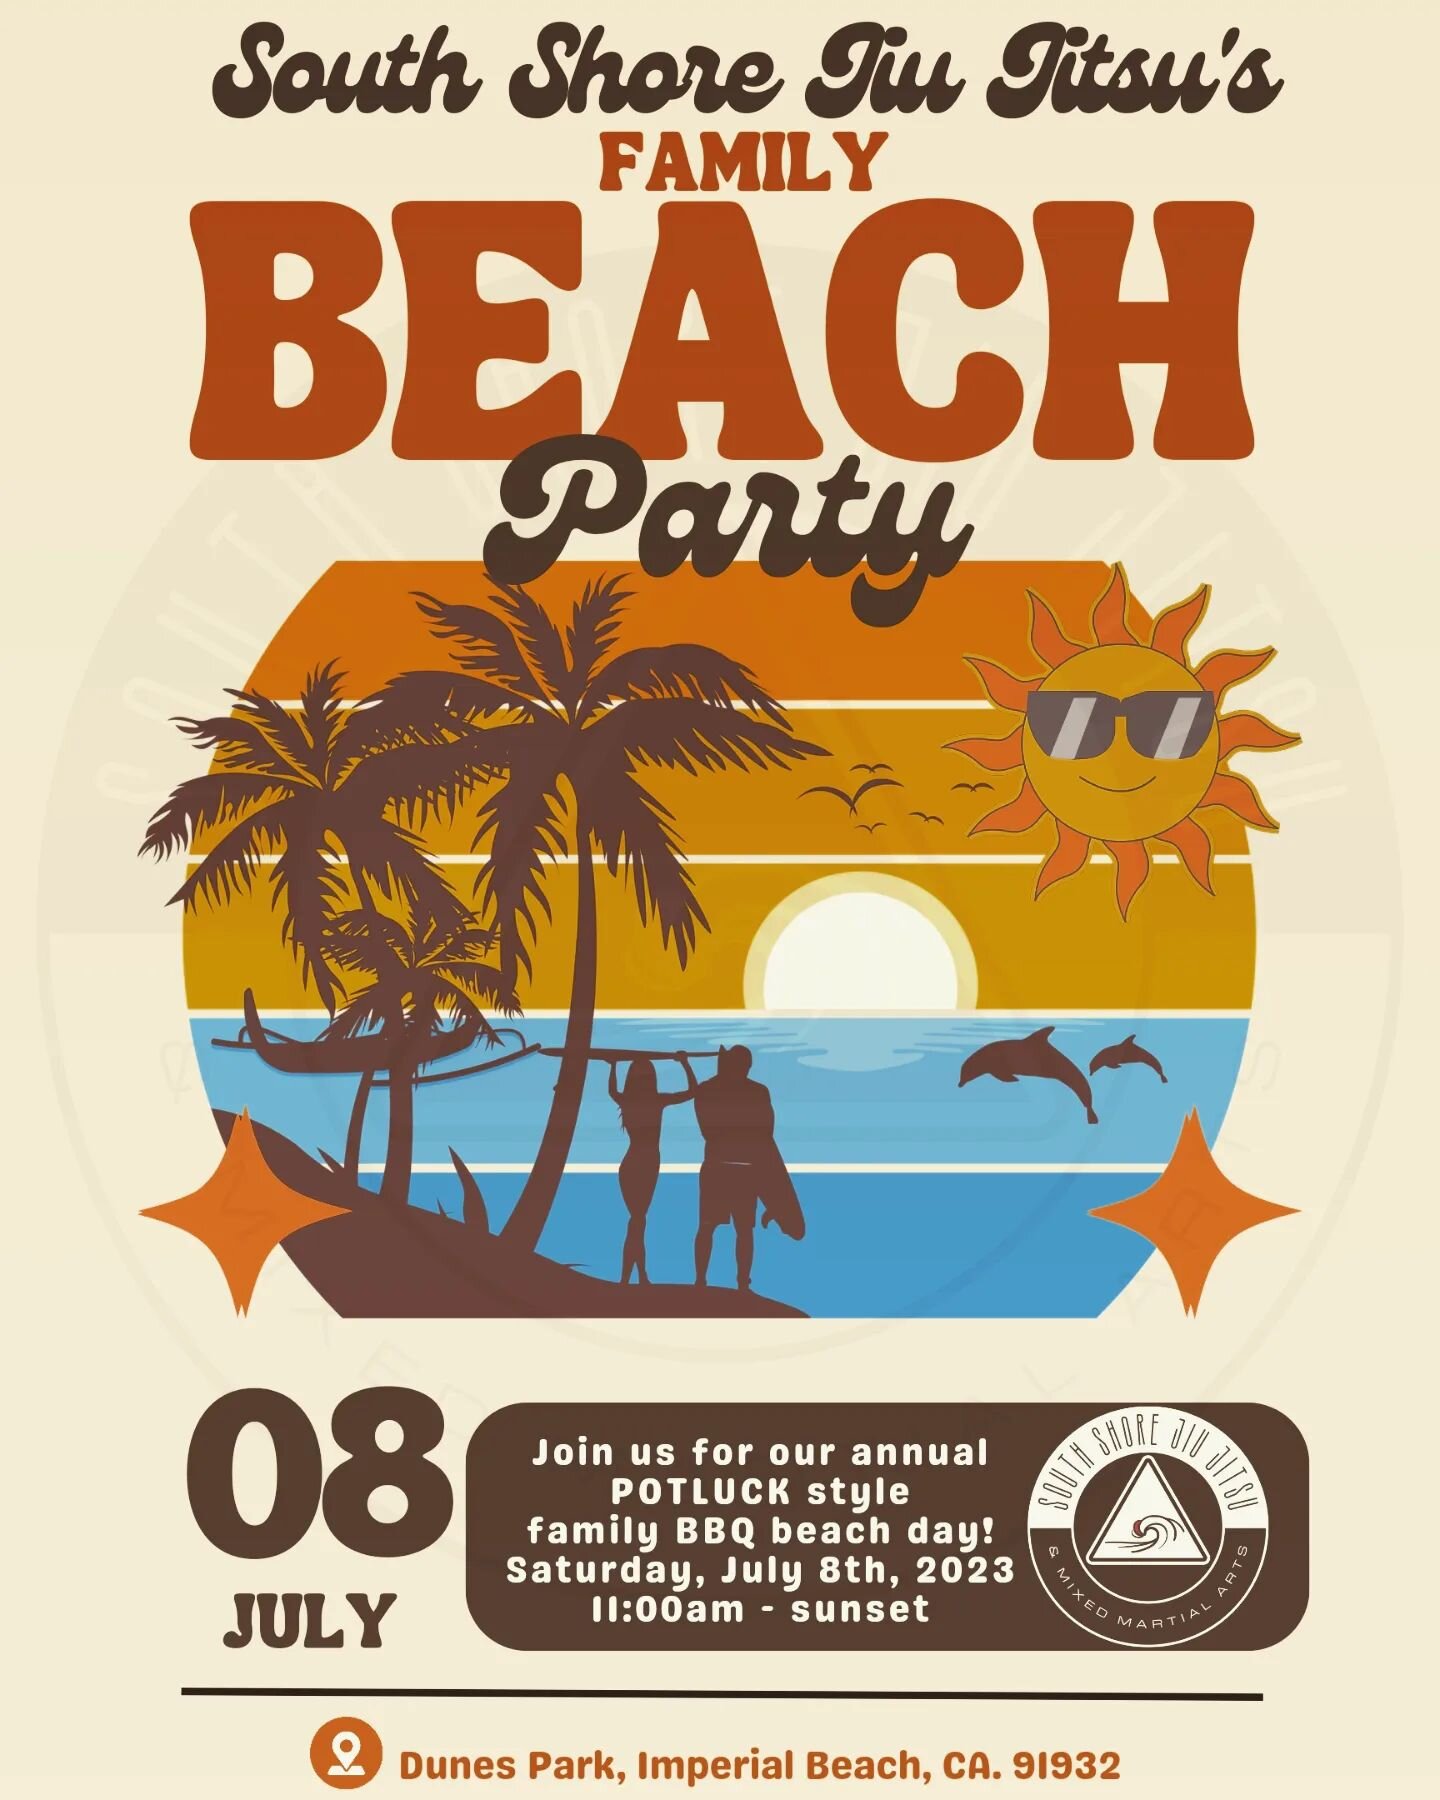 SAVE THE DATE‼️
▫️
▫️
Join us for South Shore Jiu Jitsu &amp; MMA's Annual Family BBQ Beach Party! 🌊
▫️
▫️Saturday- July 8th 2023
▫️11:00am - Sunset 
▫️POTLUCK- Bring a dish to share! 🤙
.
.
.